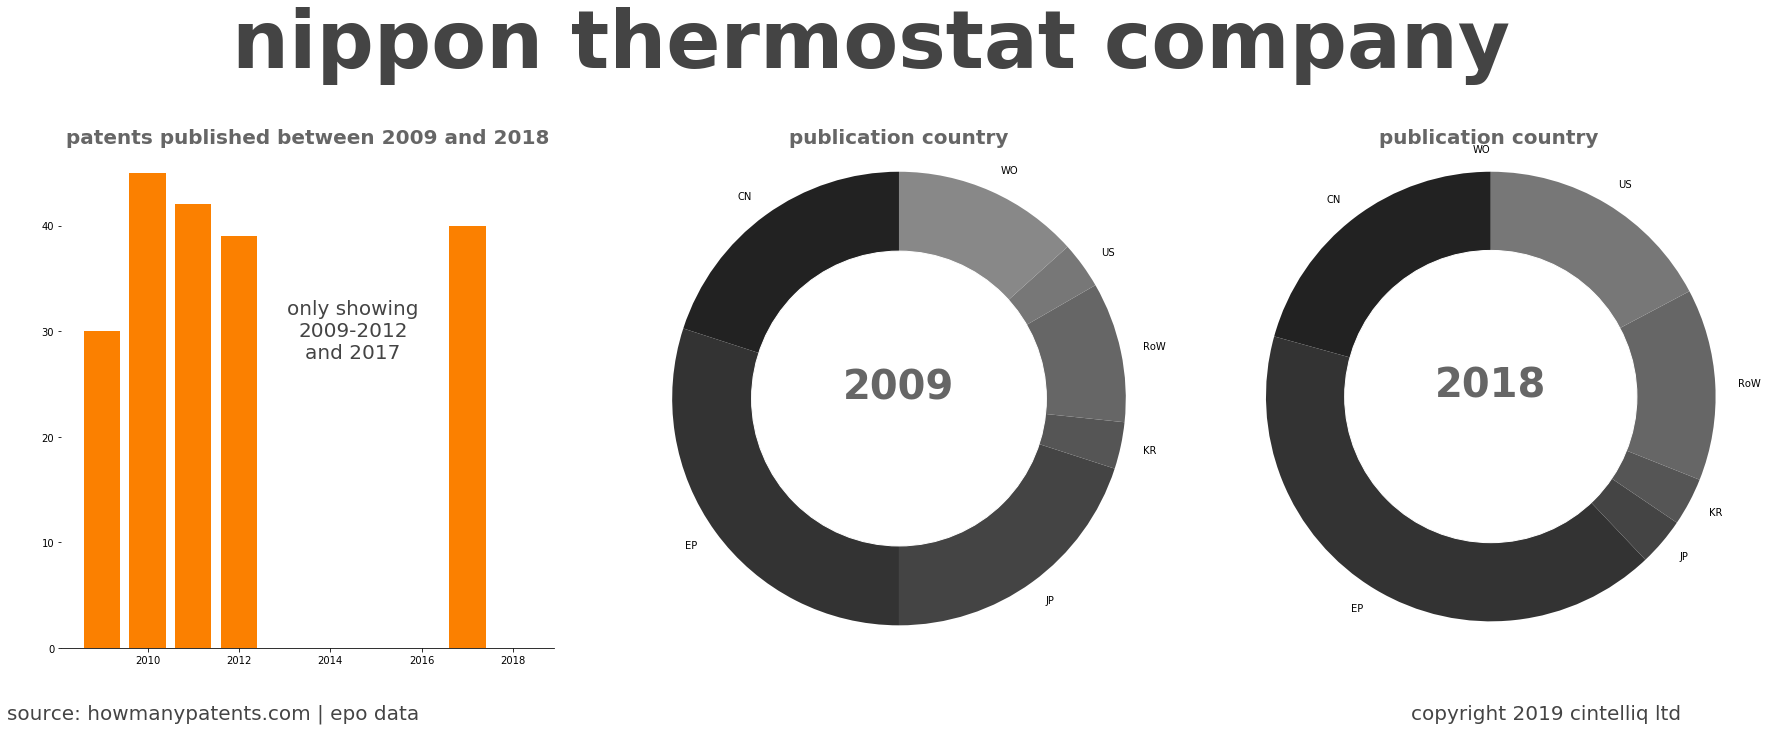 summary of patents for Nippon Thermostat Company